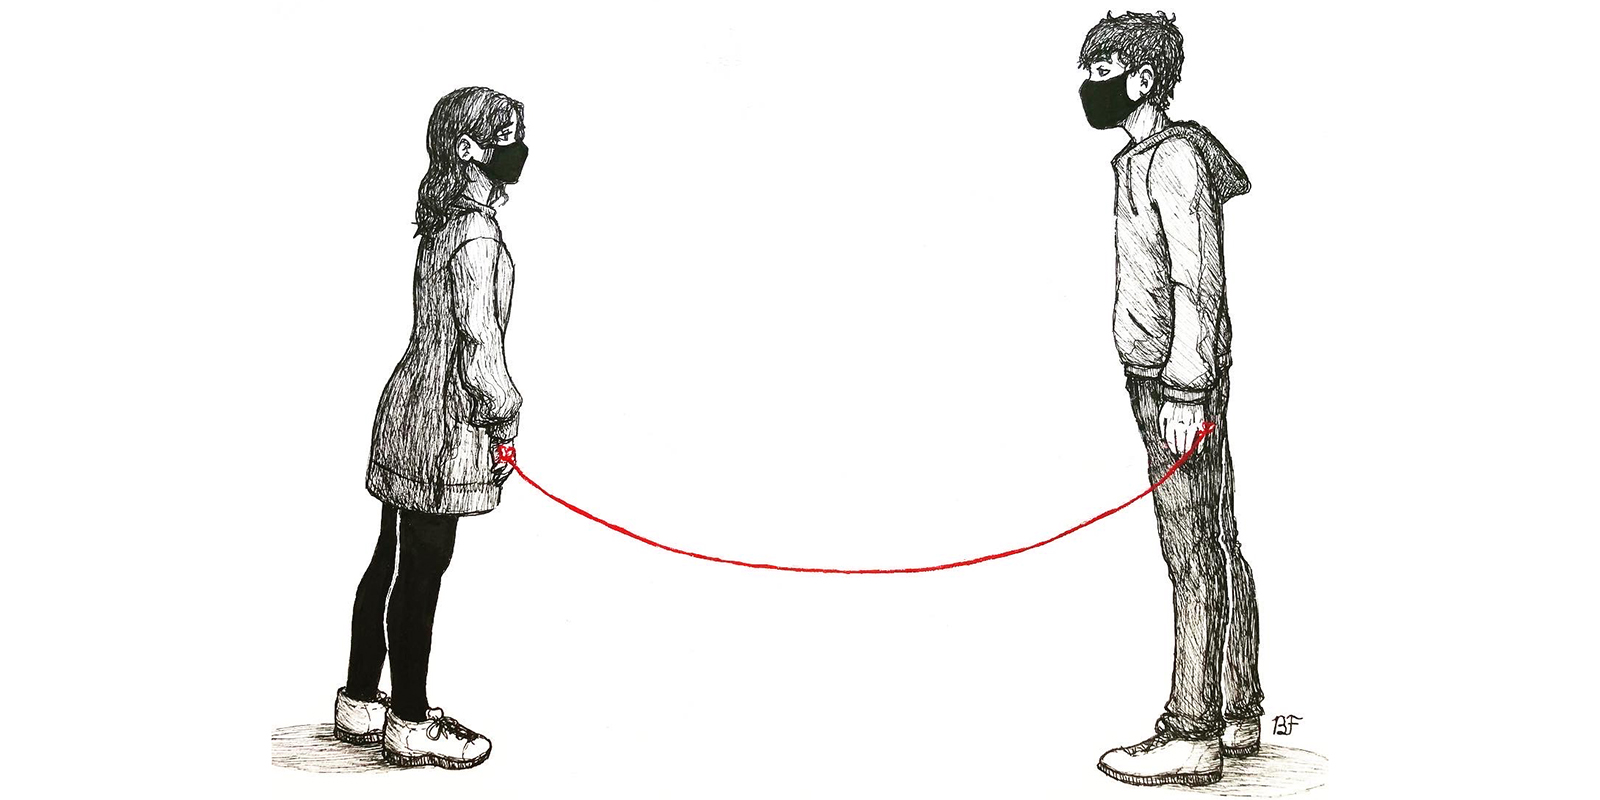 Two people wearing masks standing apart yet connected by red string, illustration